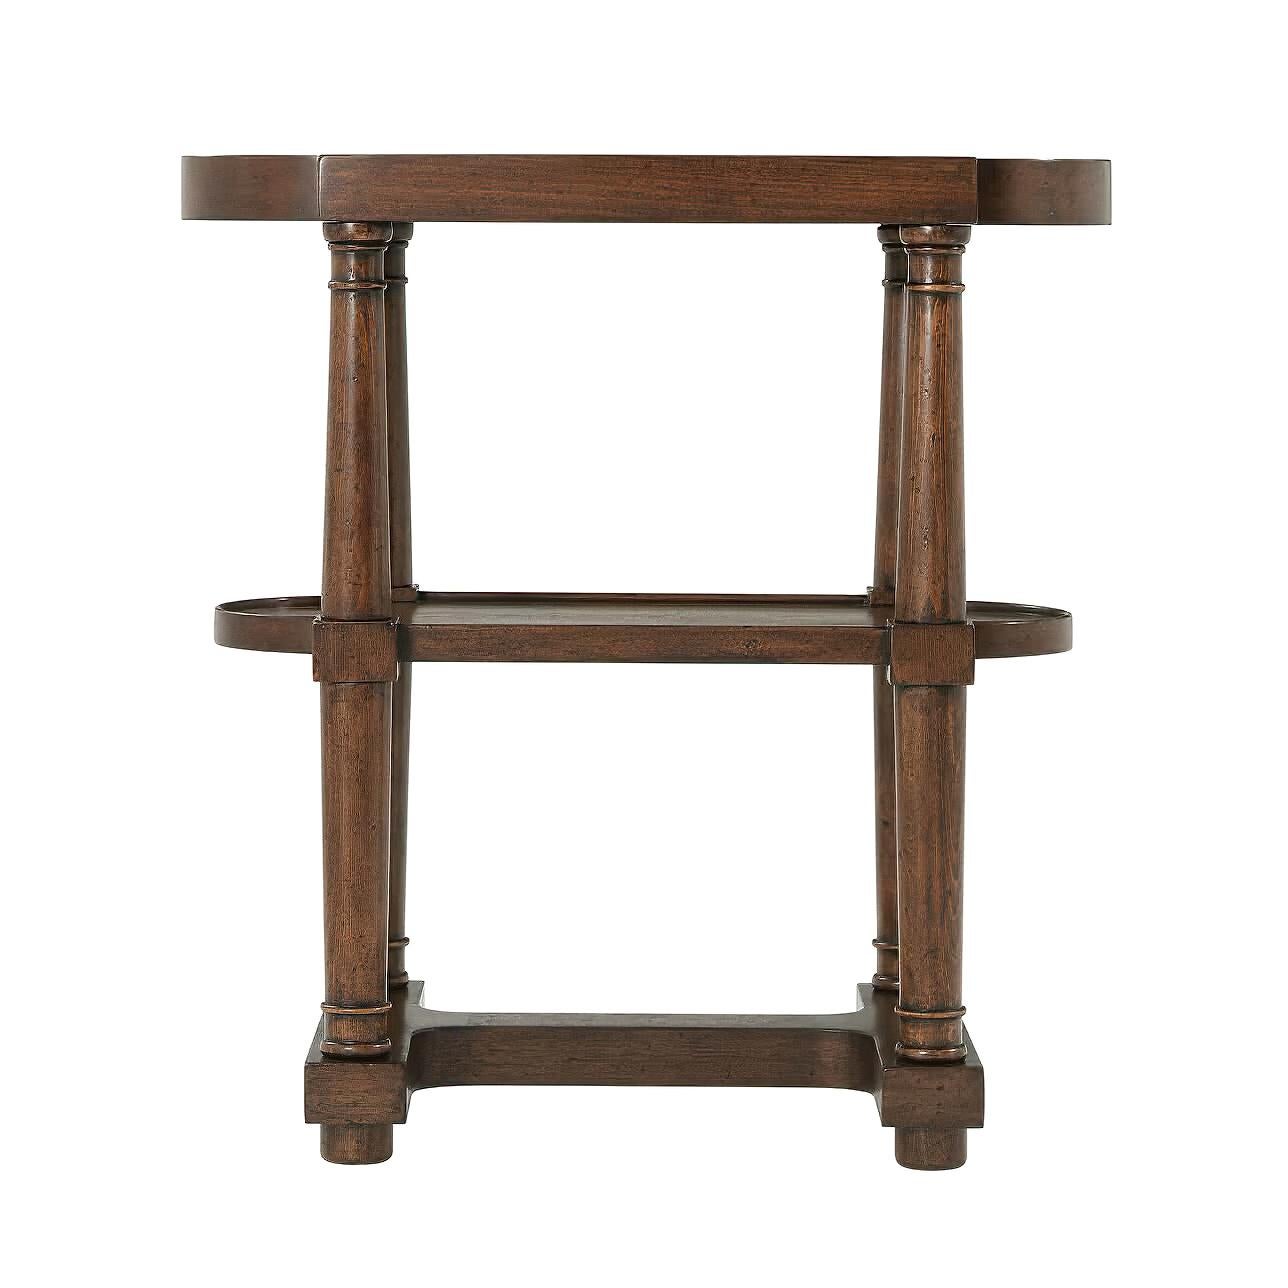 A French Empire style provincial side table of walnut and oak with a shaped dish top, with turned column form supports, a lower shaped shelf and stretcher base.

Dimensions: 25